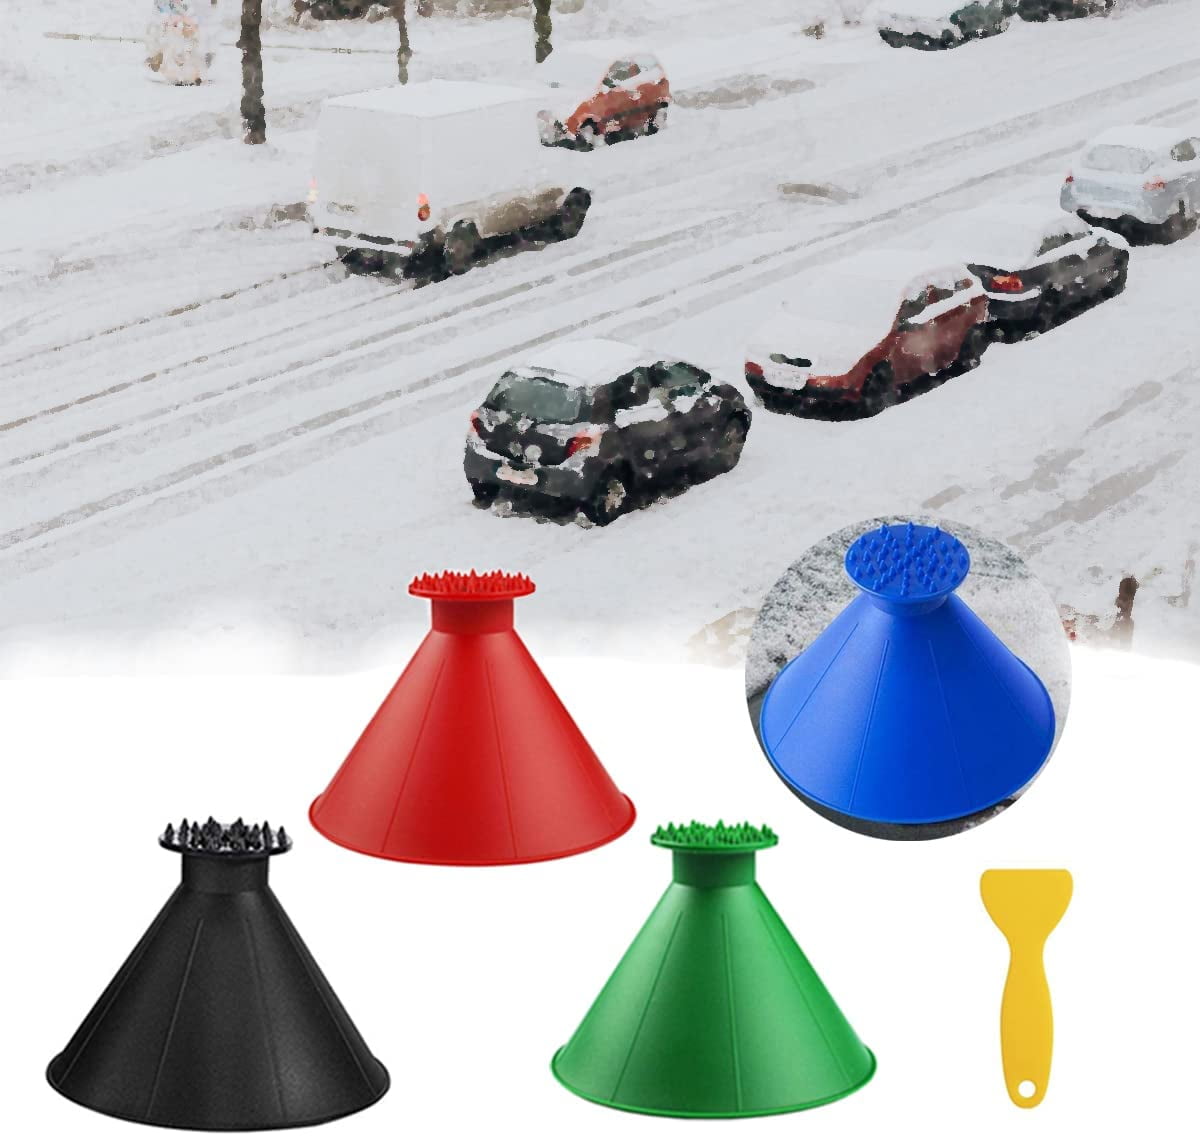 Professional Snow Removal Tool Set Snow Scraper Brush Telescopic Adjustable  Car Window Snow Cleaner for Car Auto Truck Vehicles - AliExpress